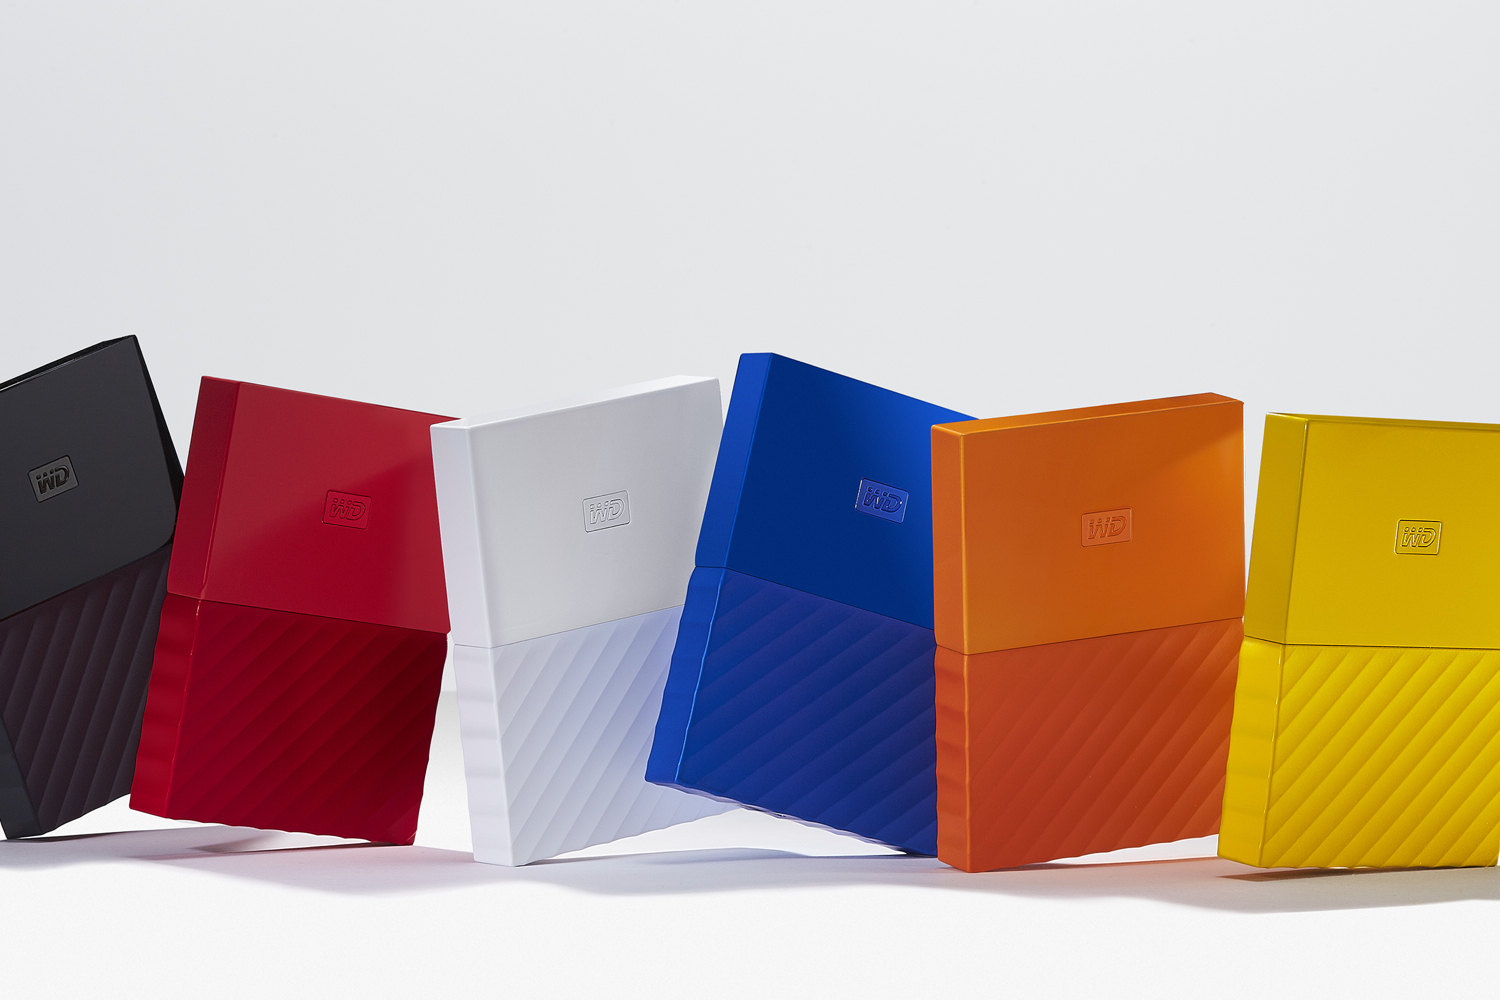 western digital releases redesigned portable hard drives wd my passport family hires